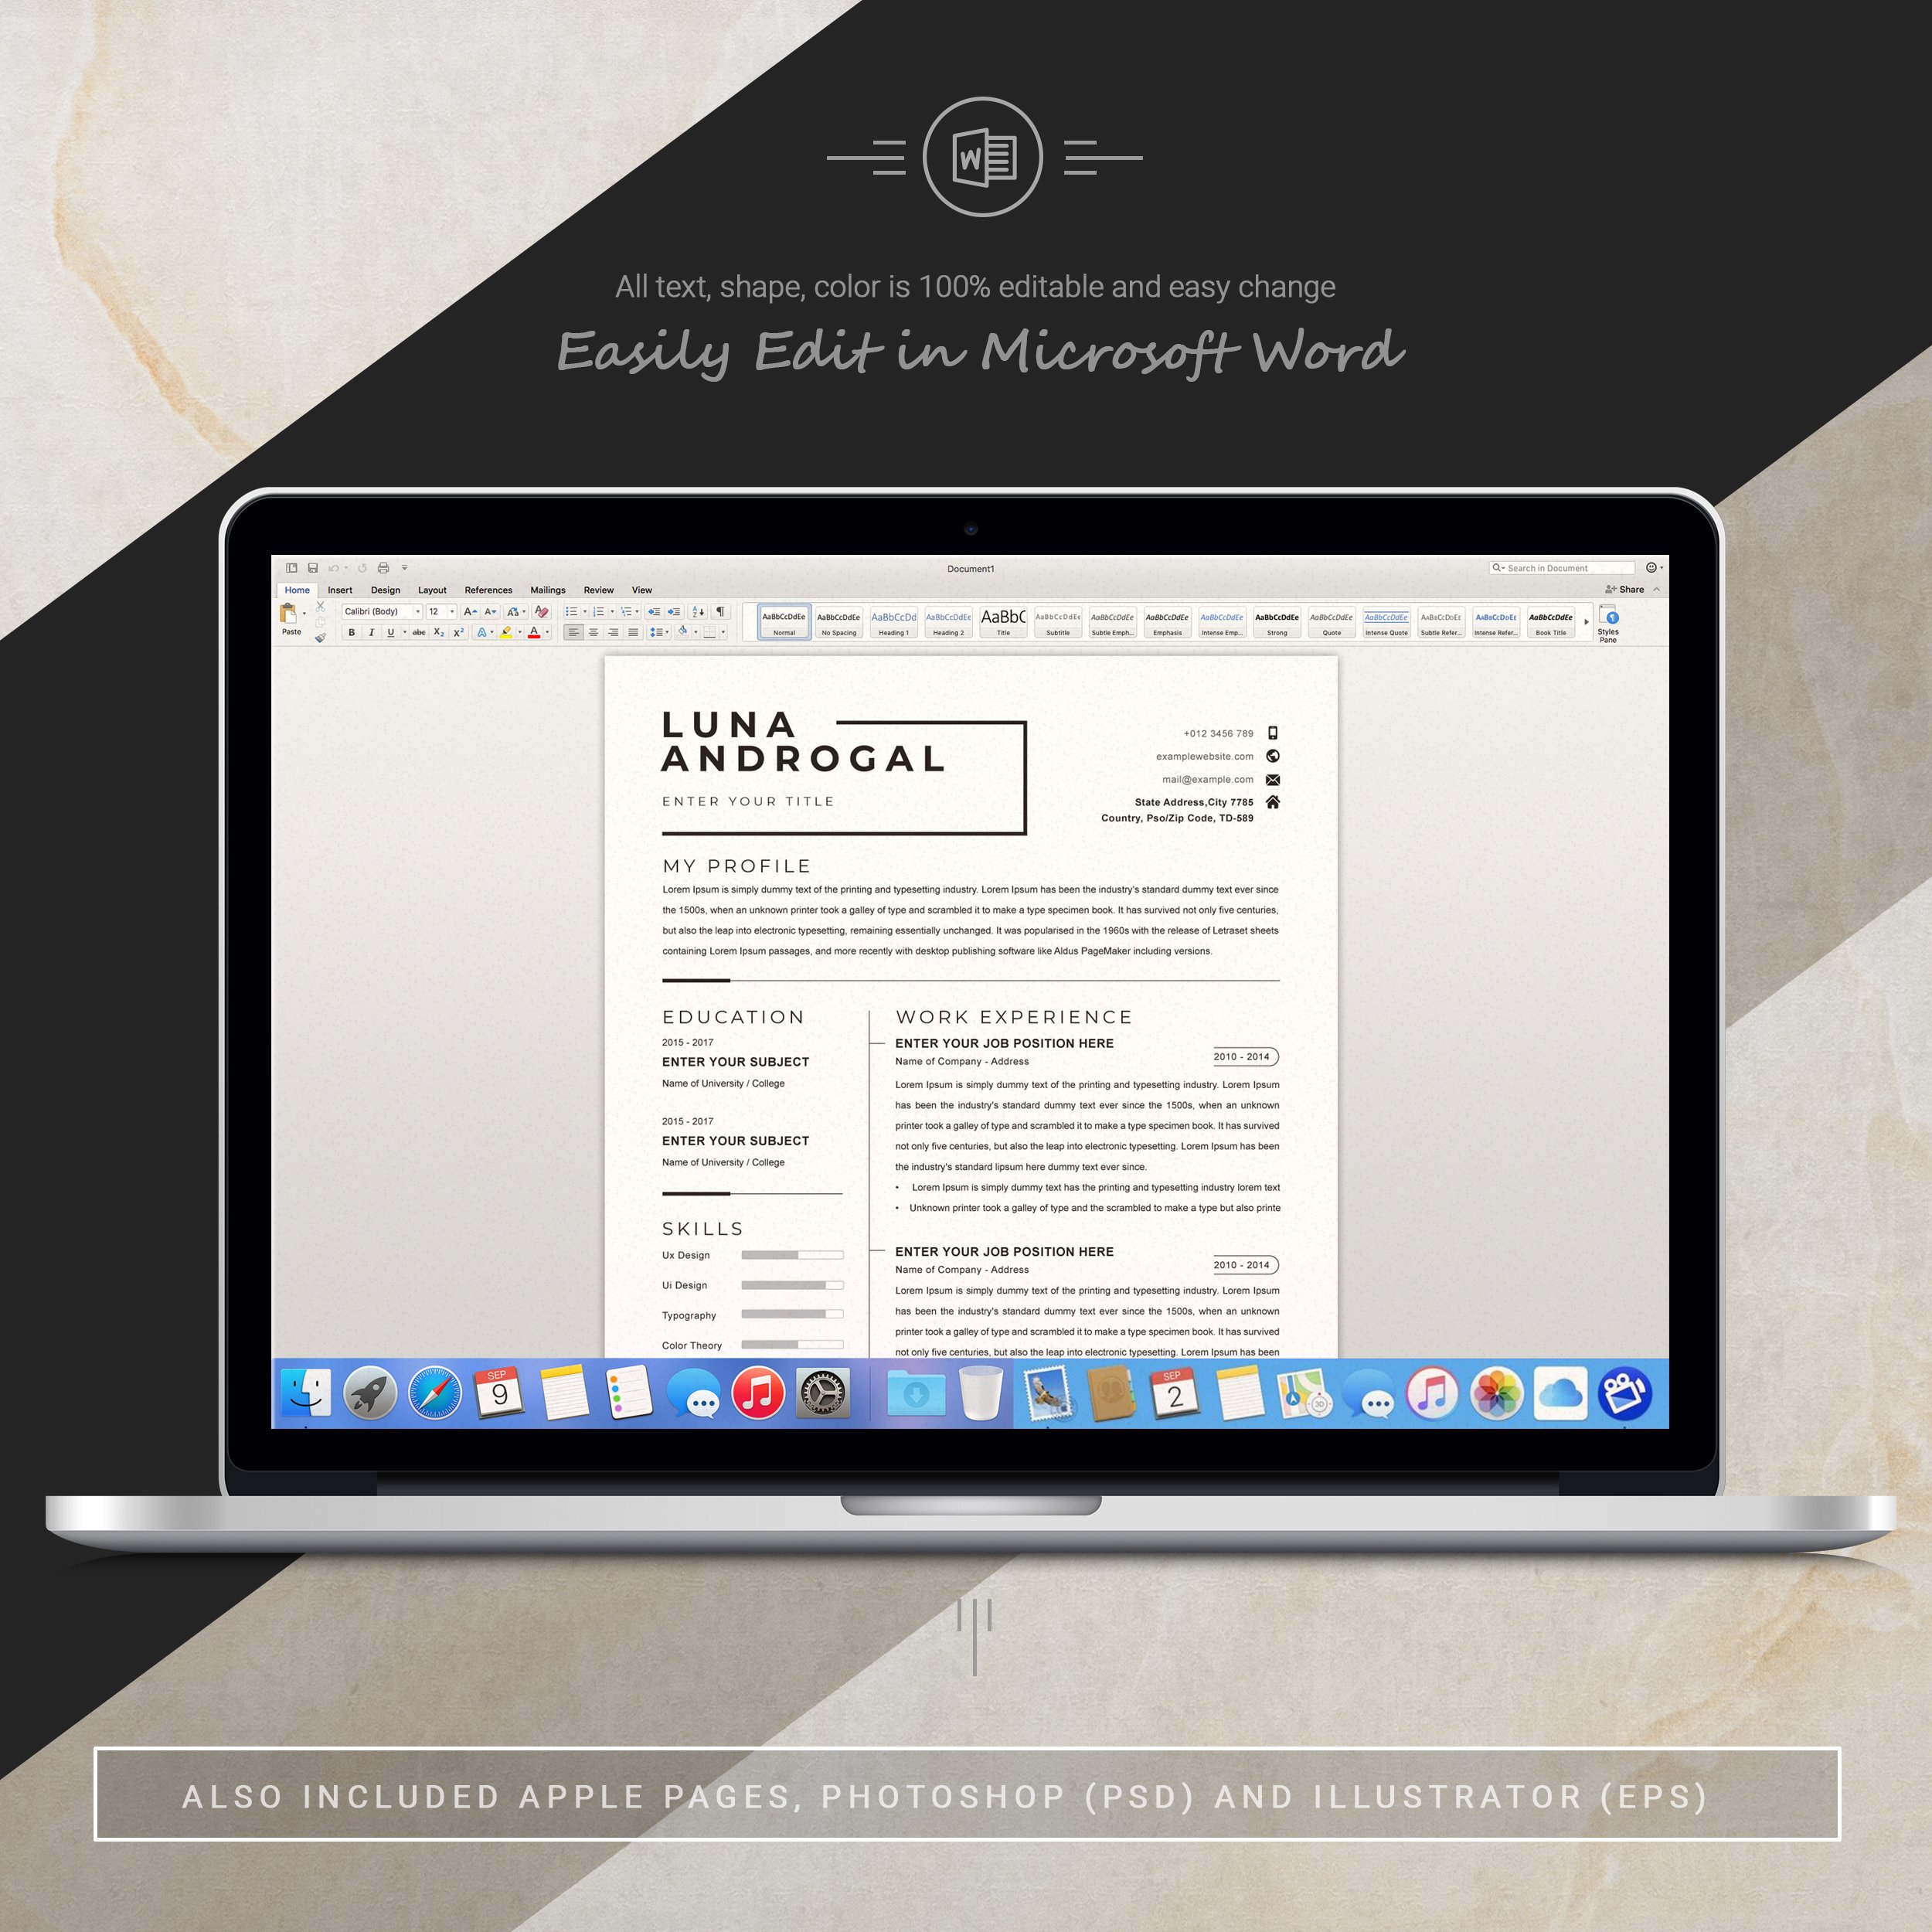 06 3 pages free resume ms word file format design template 679